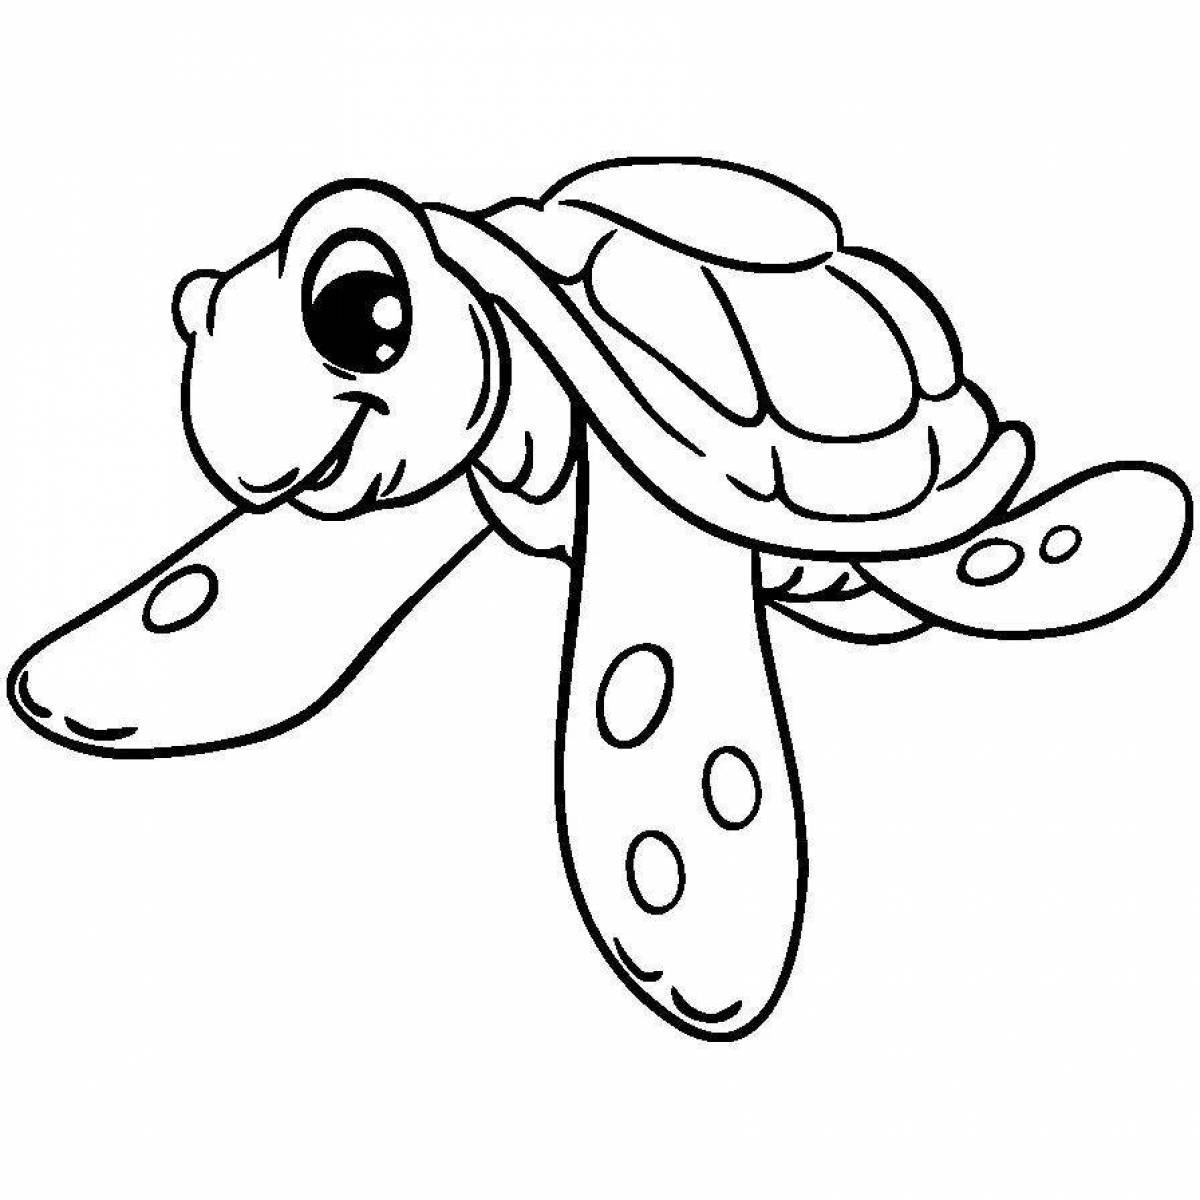 Colorful cute turtle coloring book